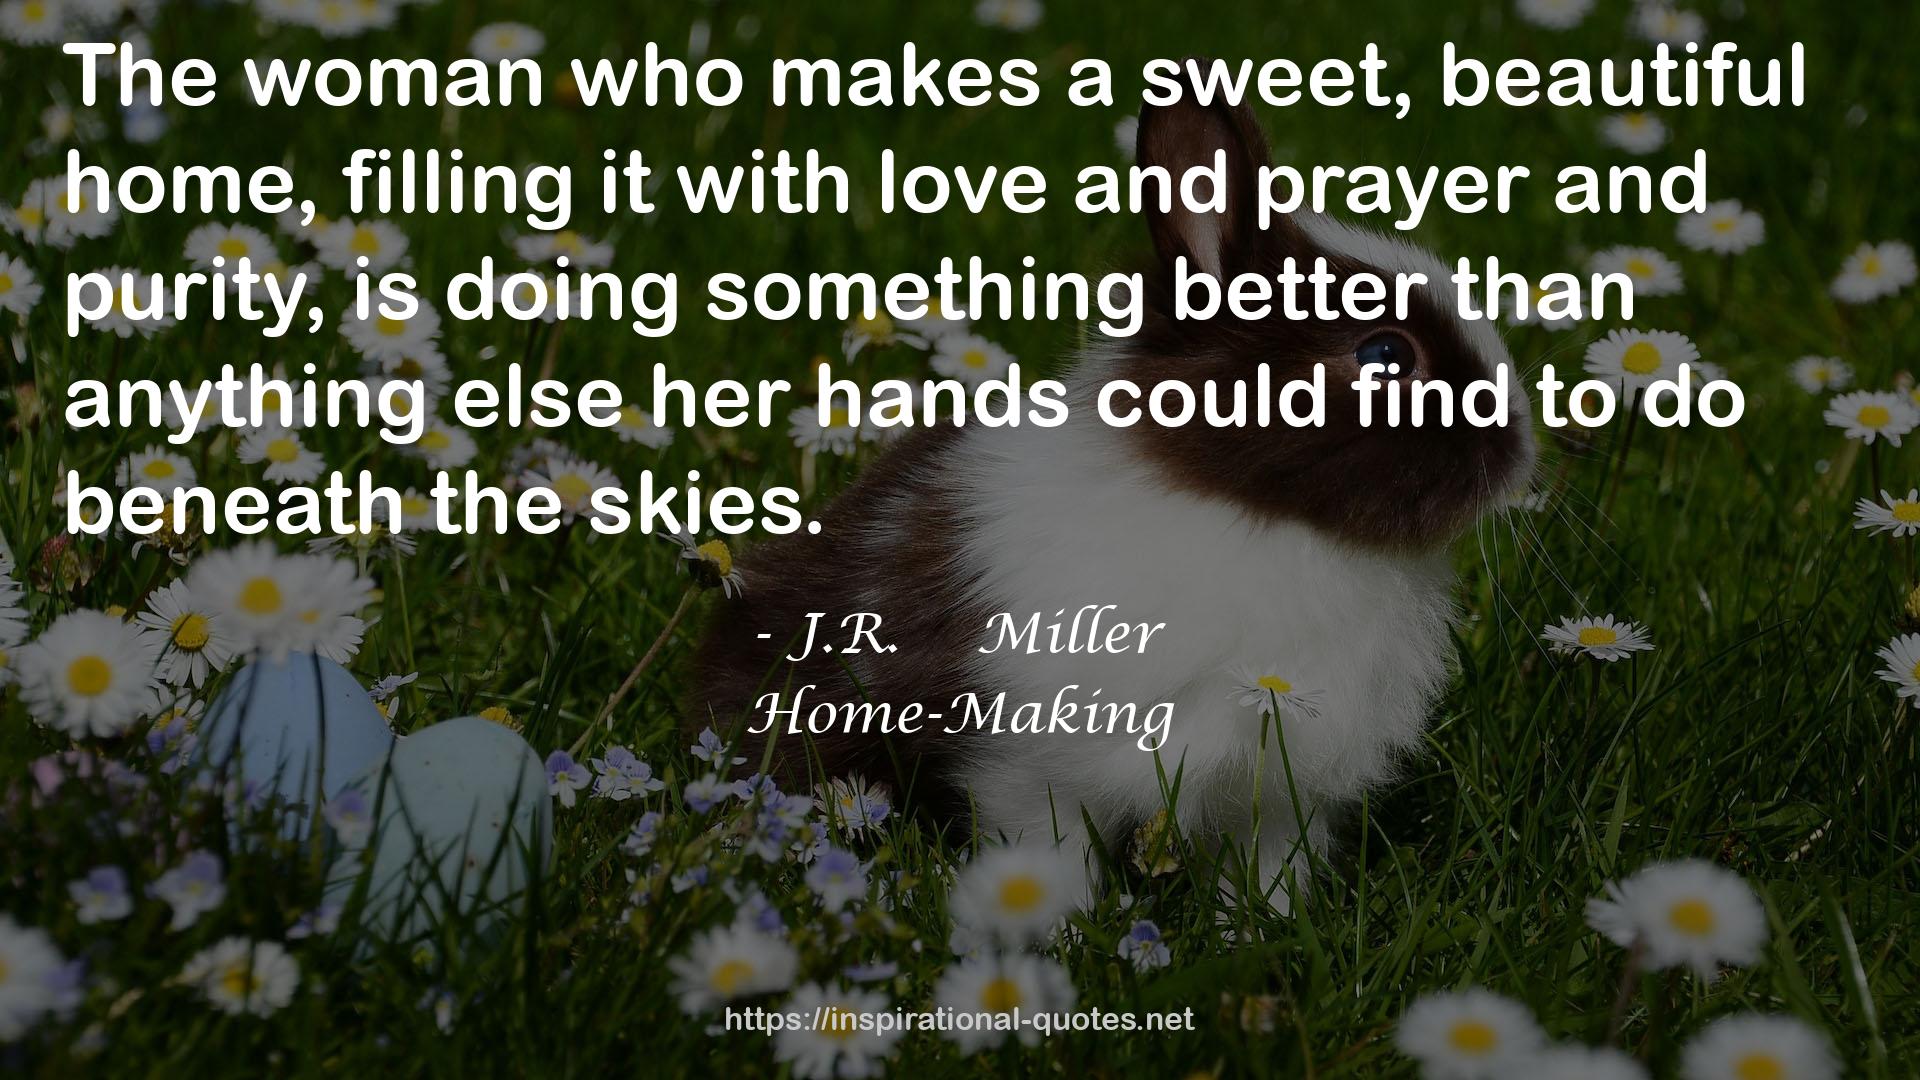 Home-Making QUOTES